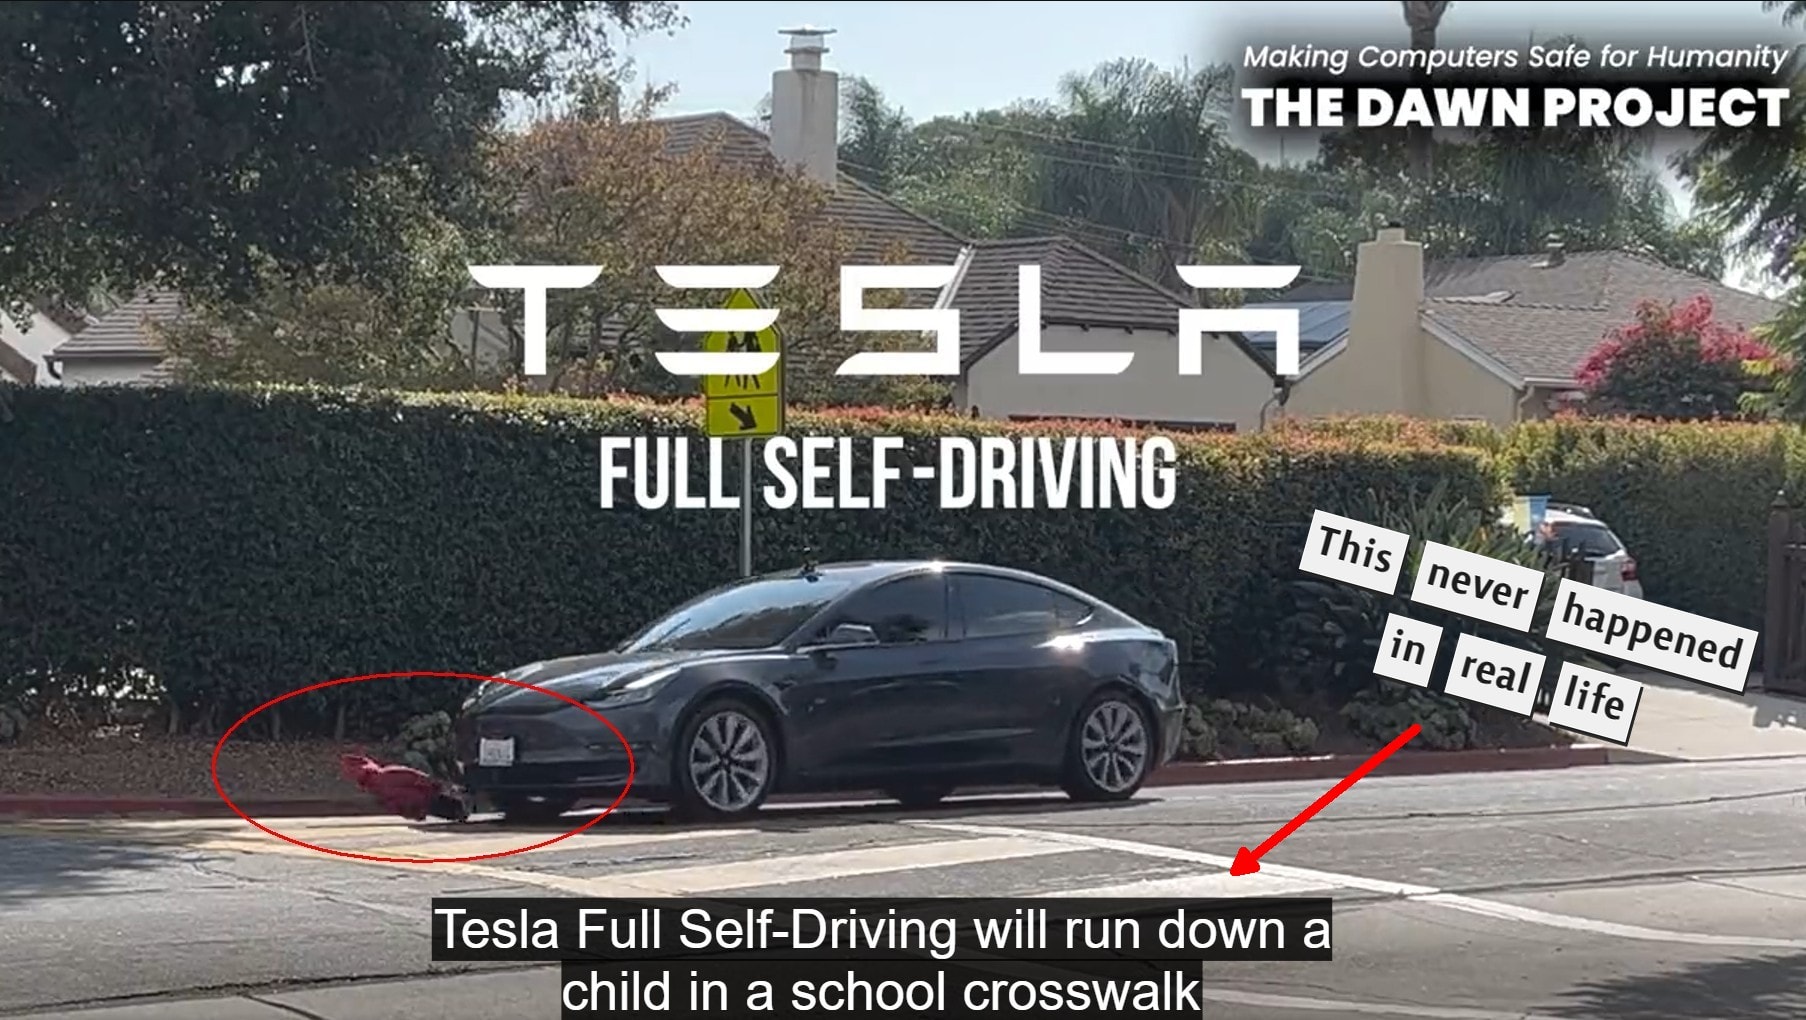 https://s1.cdn.autoevolution.com/images/news/billionaire-o-dowd-spends-millions-on-advertising-for-tesla-fsd-repeats-past-mistakes-210247_1.jpg